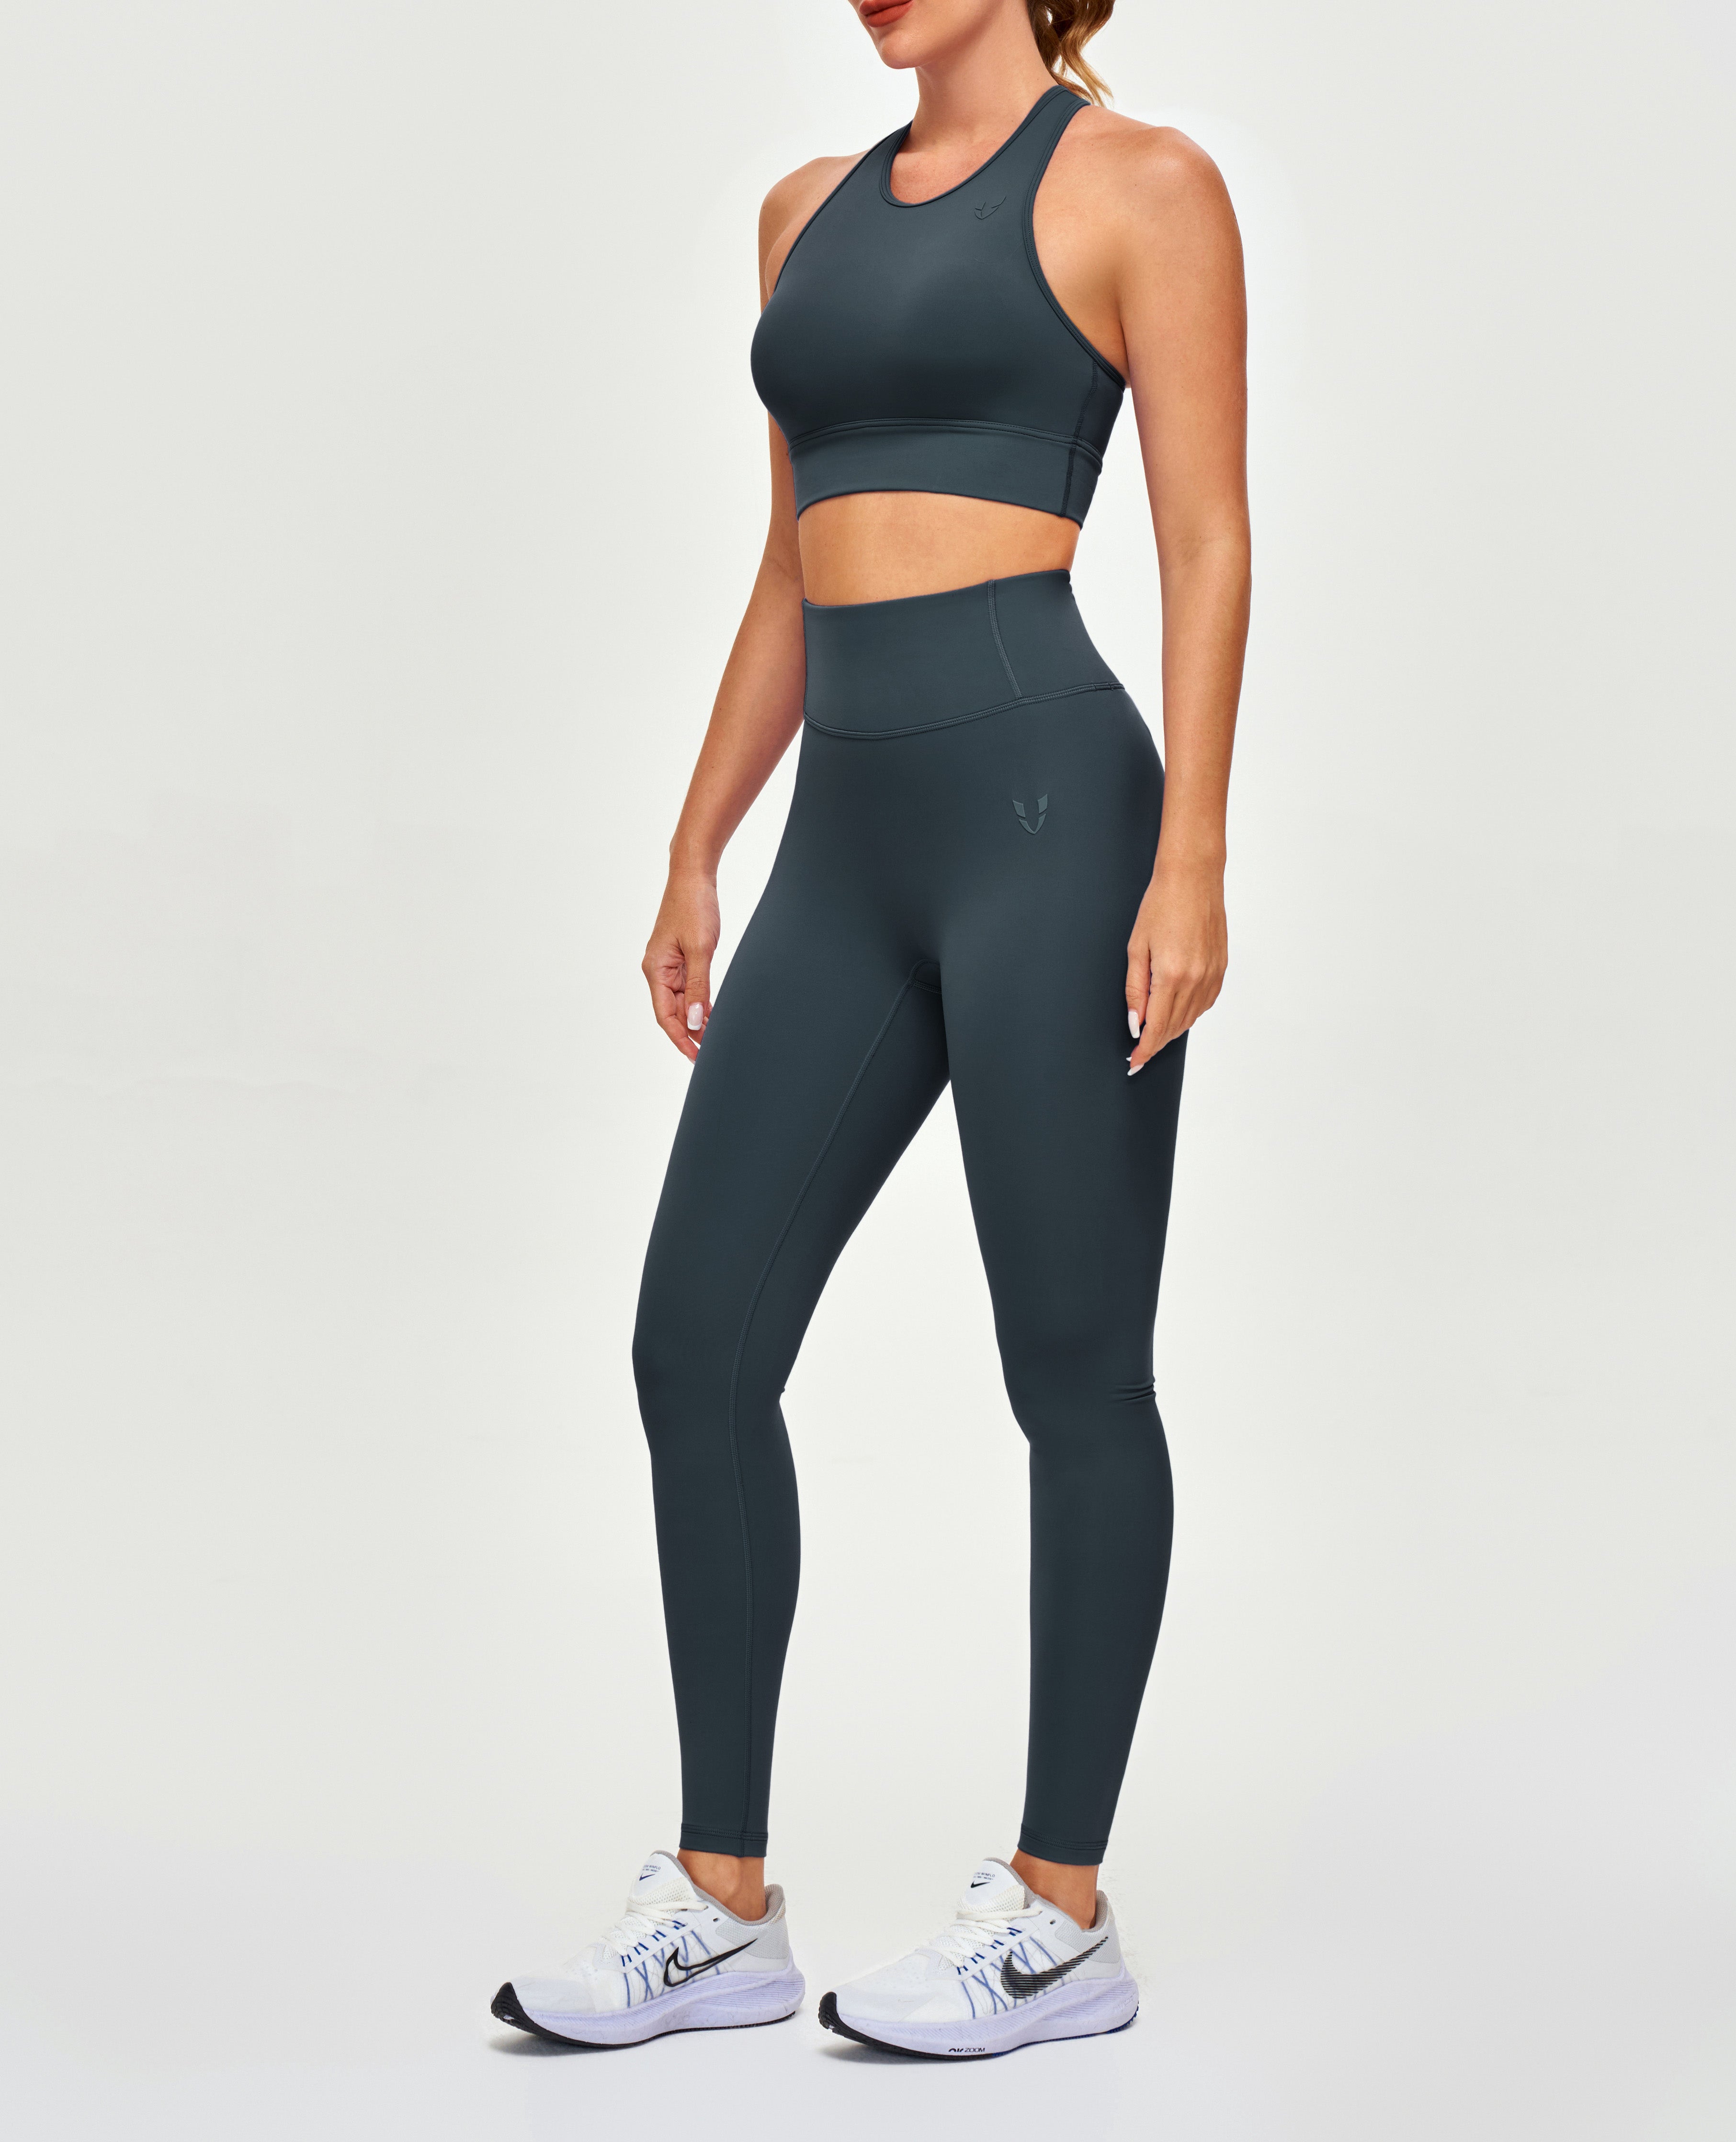 High Waisted Workout Leggings - Gray